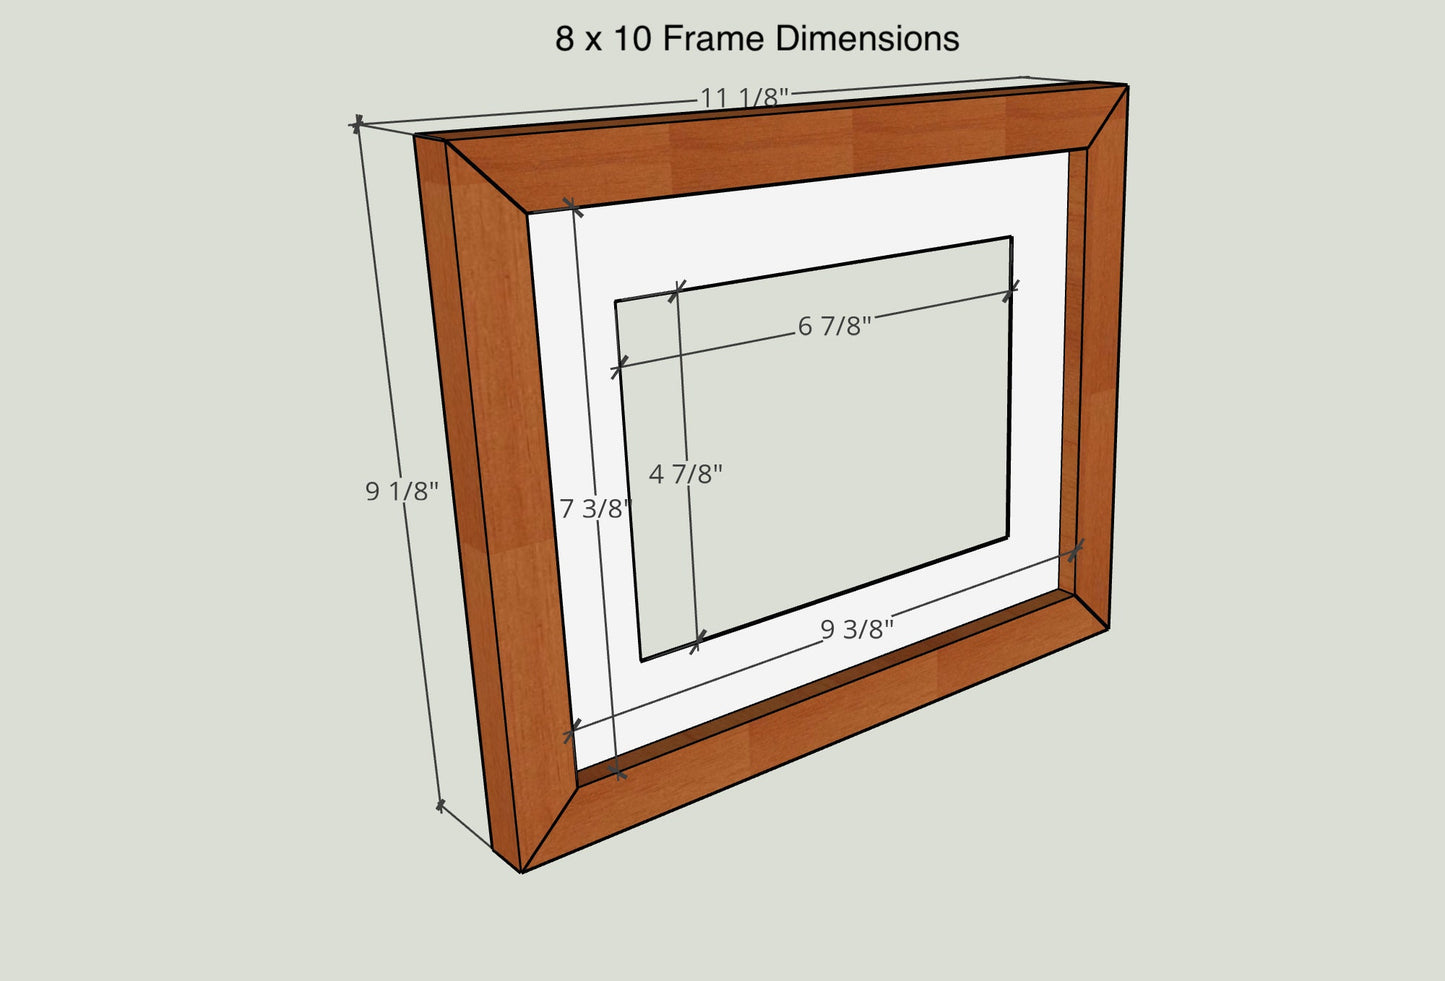 Ambrosia Maple Hardwood Gallery Frame - Picture Frame | Natural Wood Frame